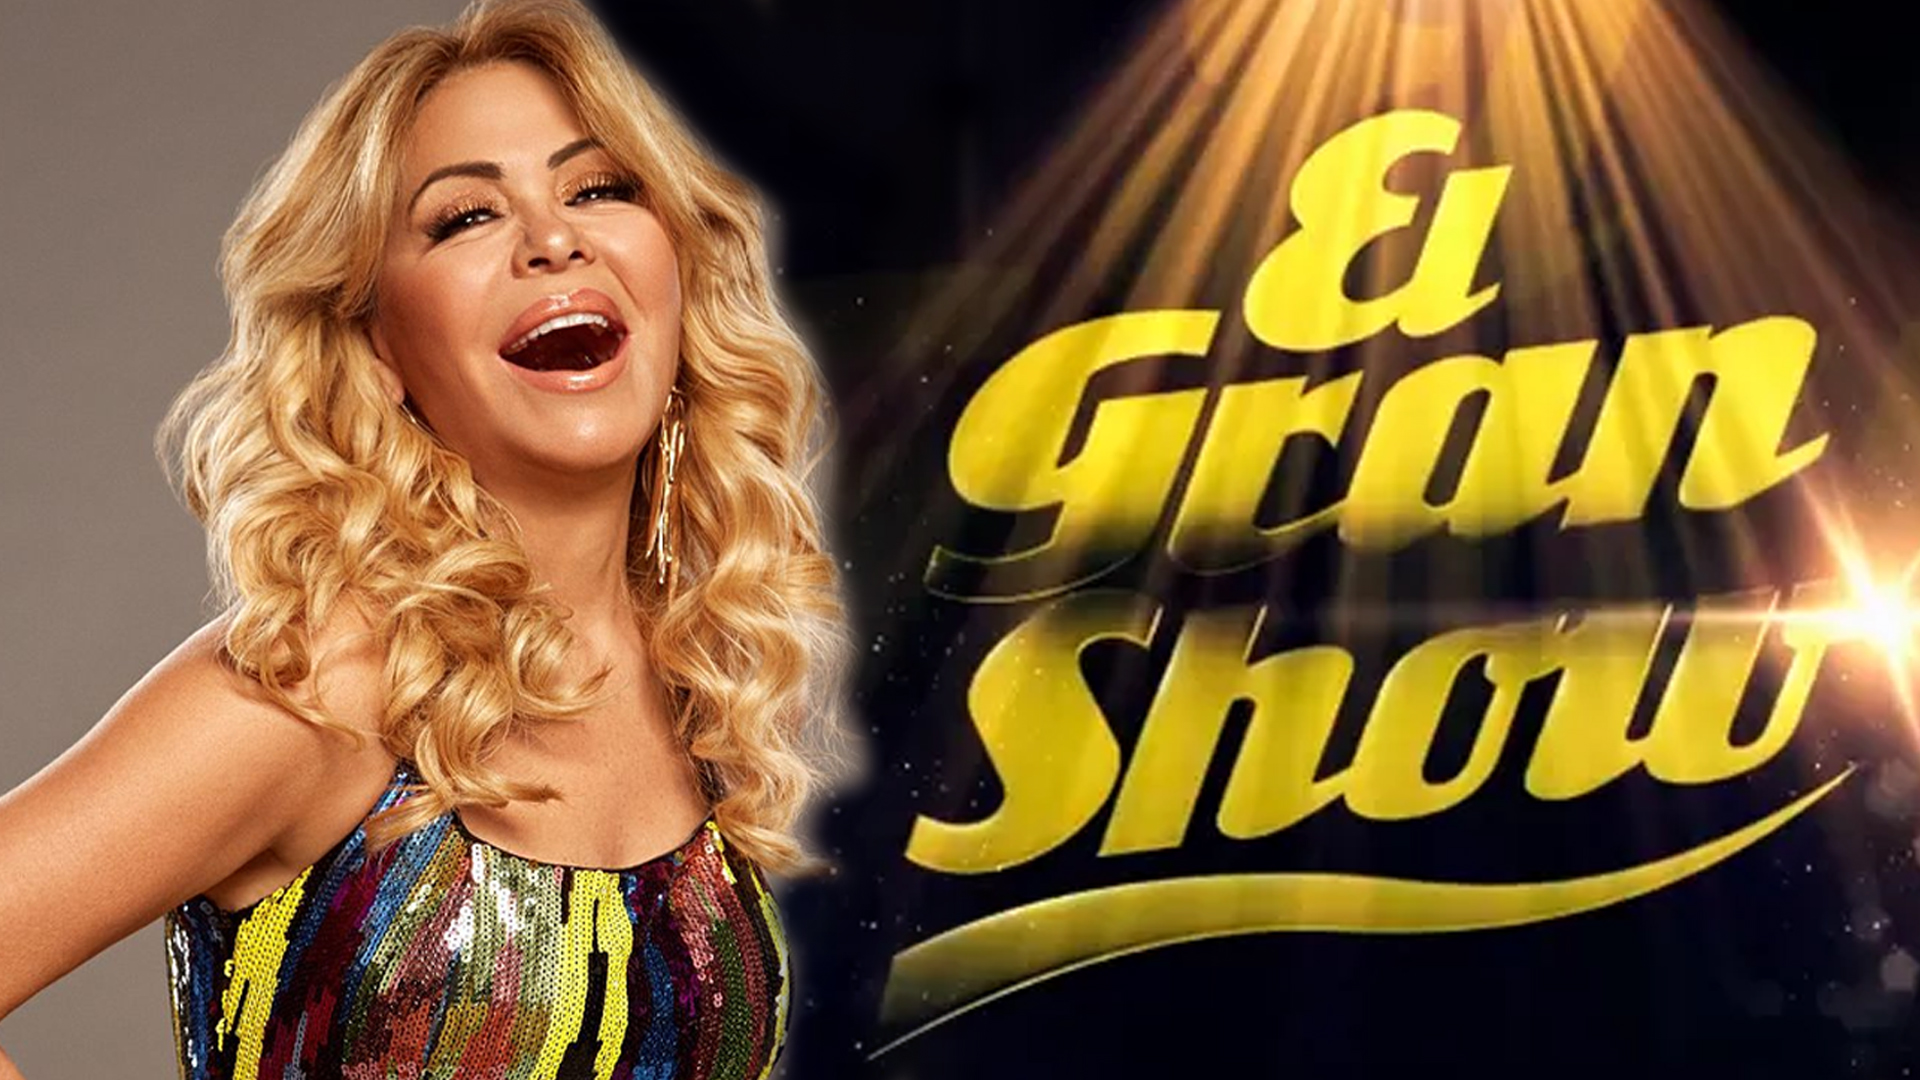 'The Great Show': all the details about the premiere.